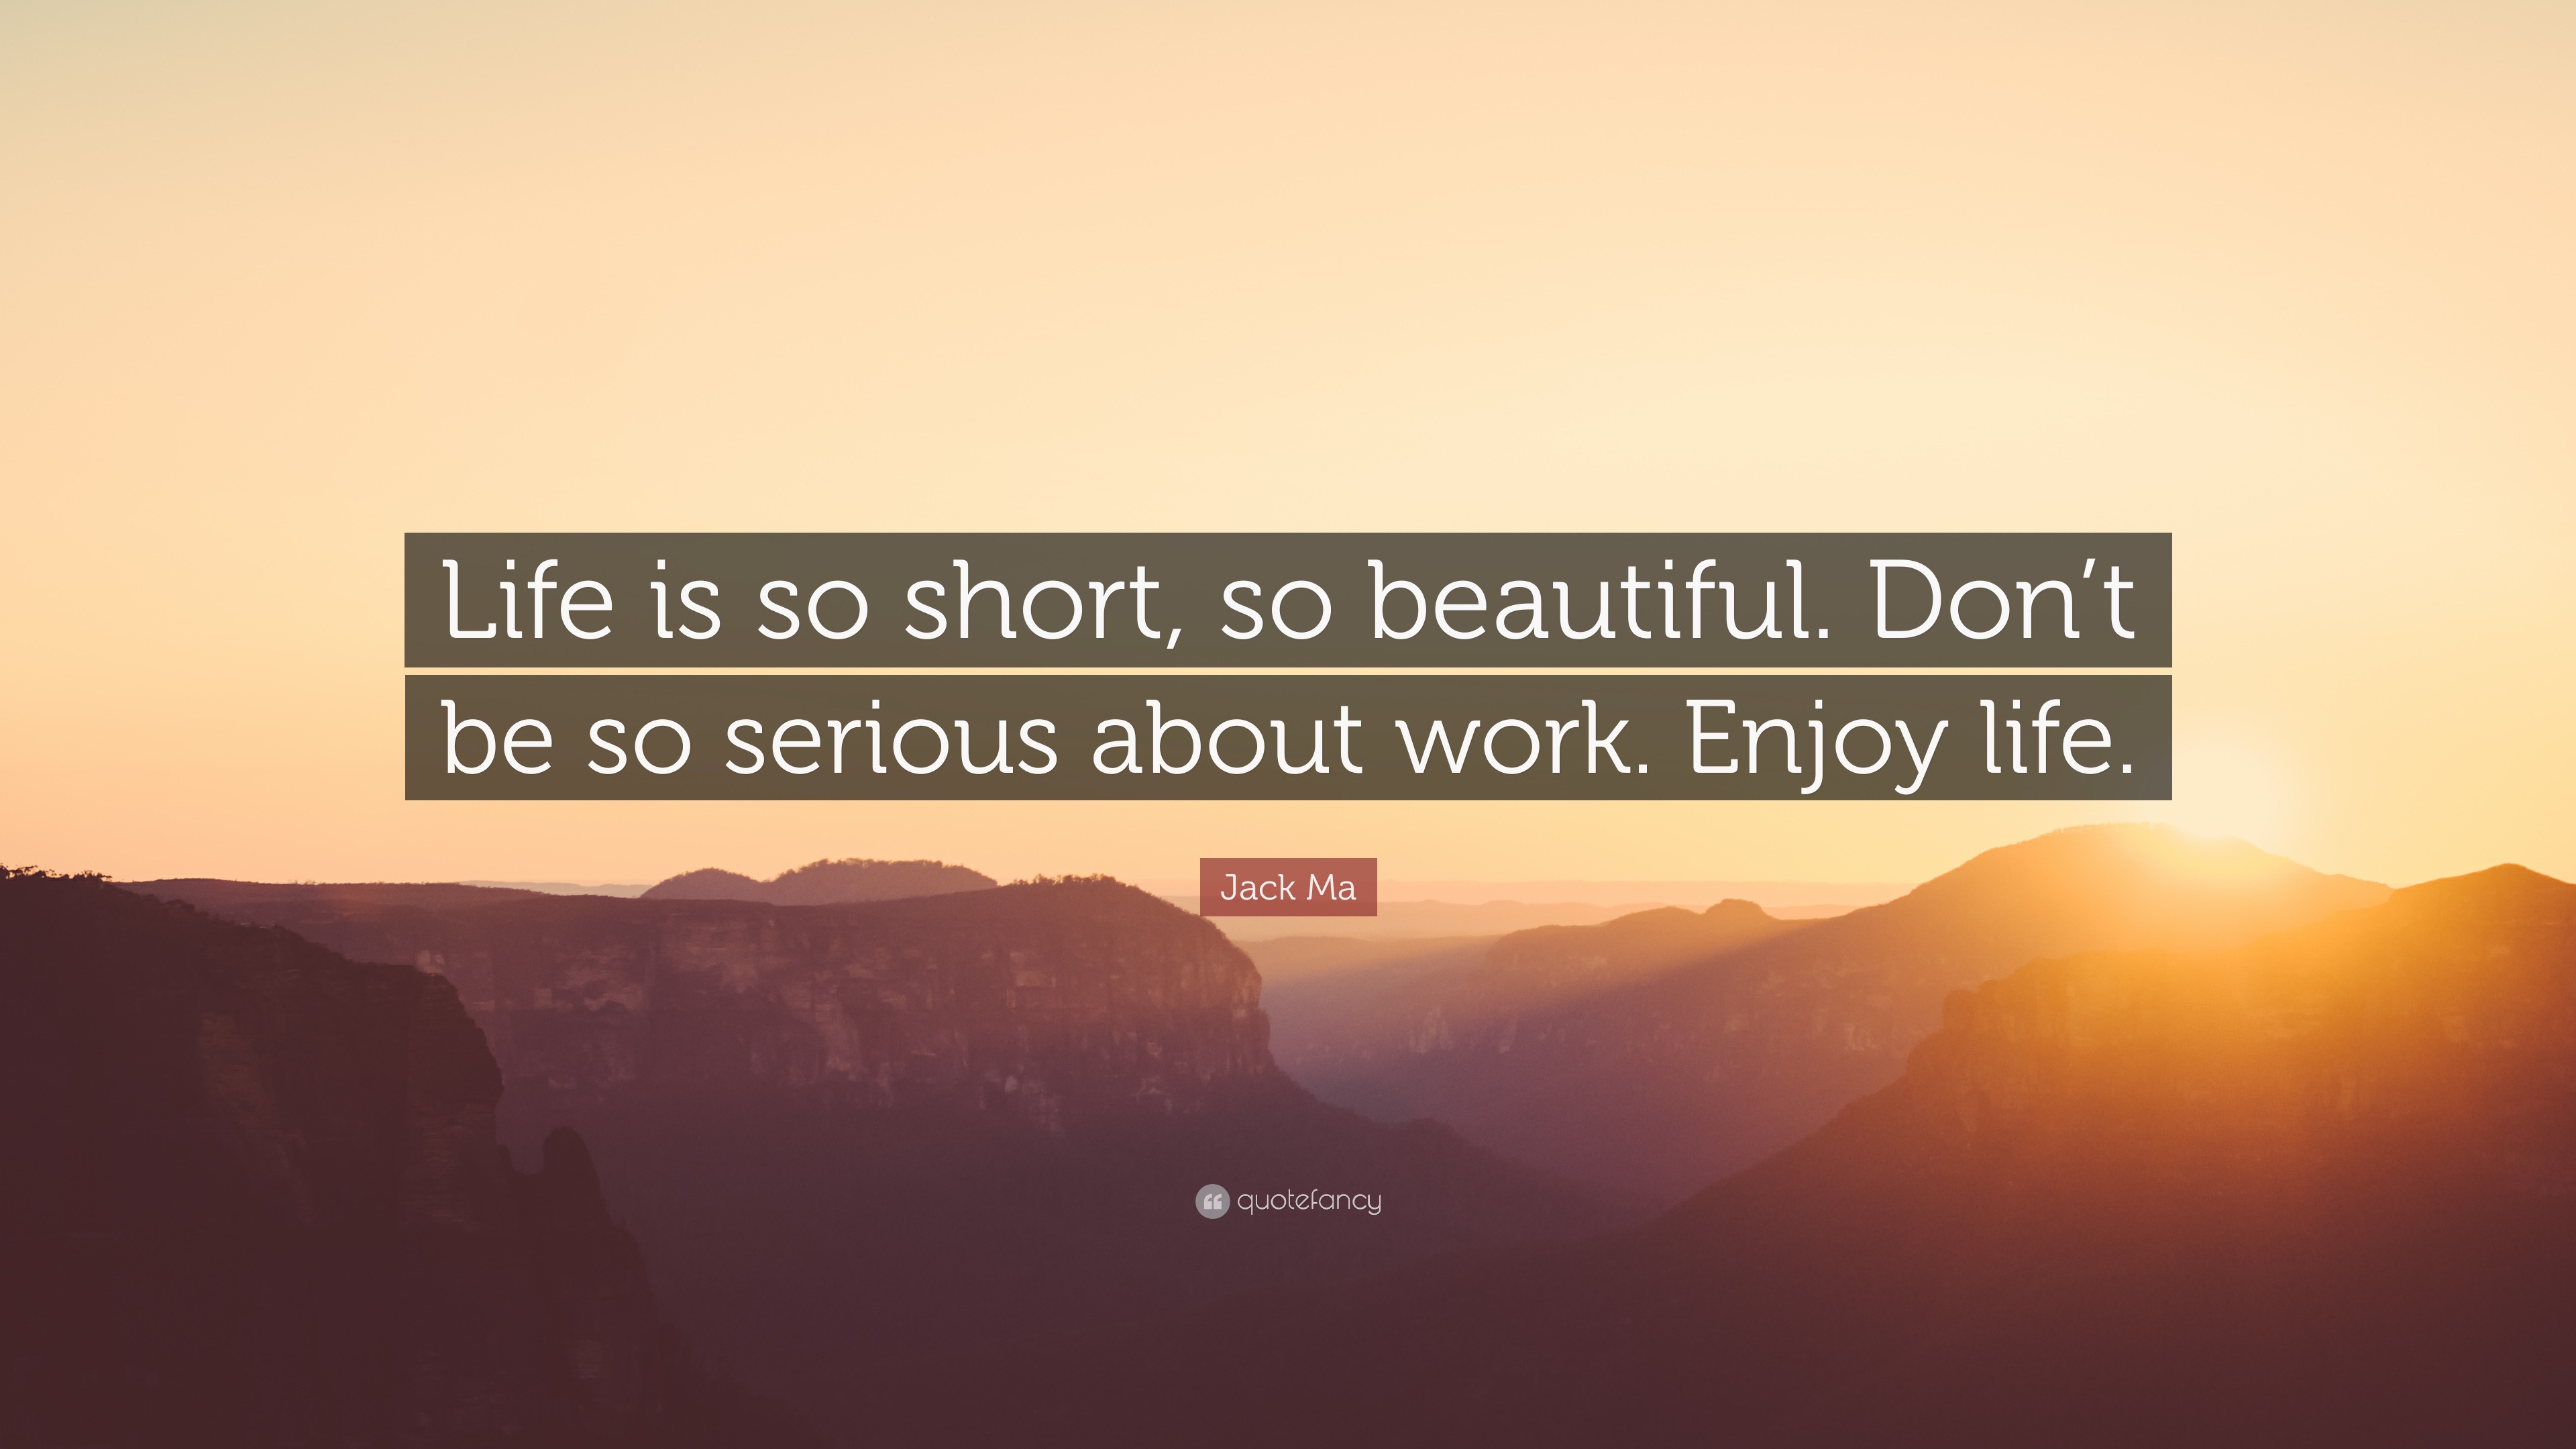 Jack Ma Quote “Life is so short so beautiful Don t